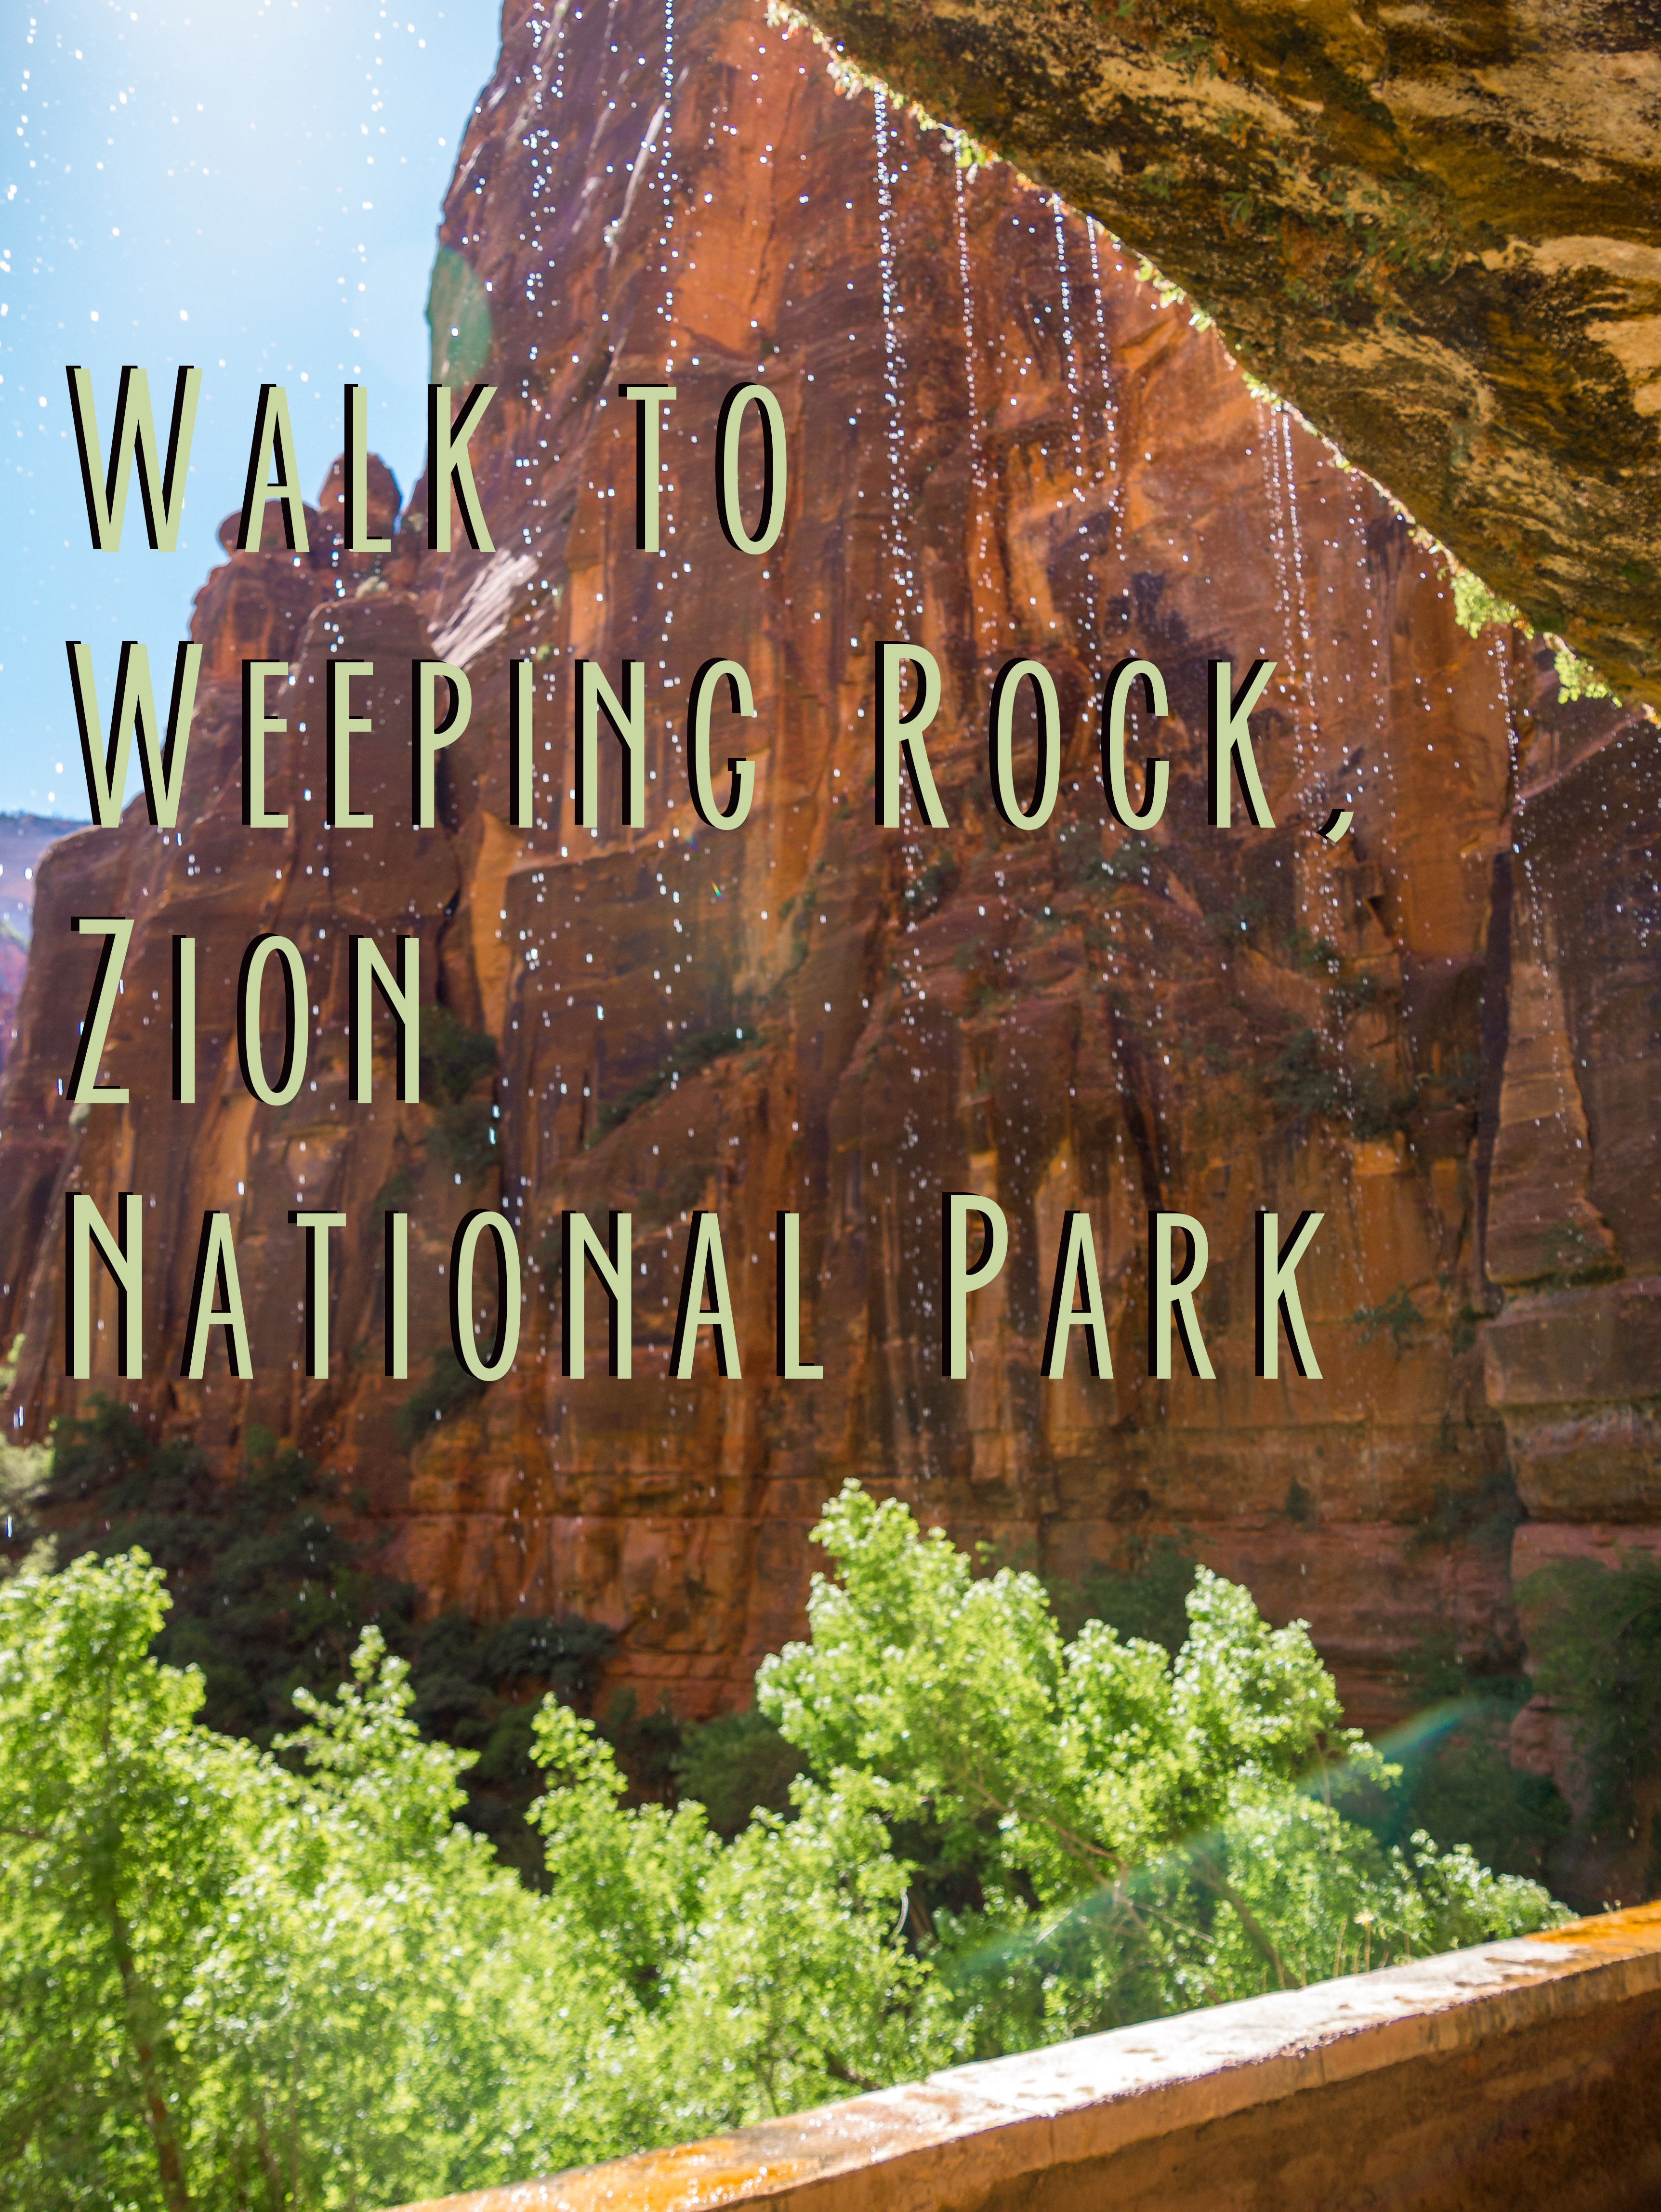 Title card for weeping rock at Zion National Park